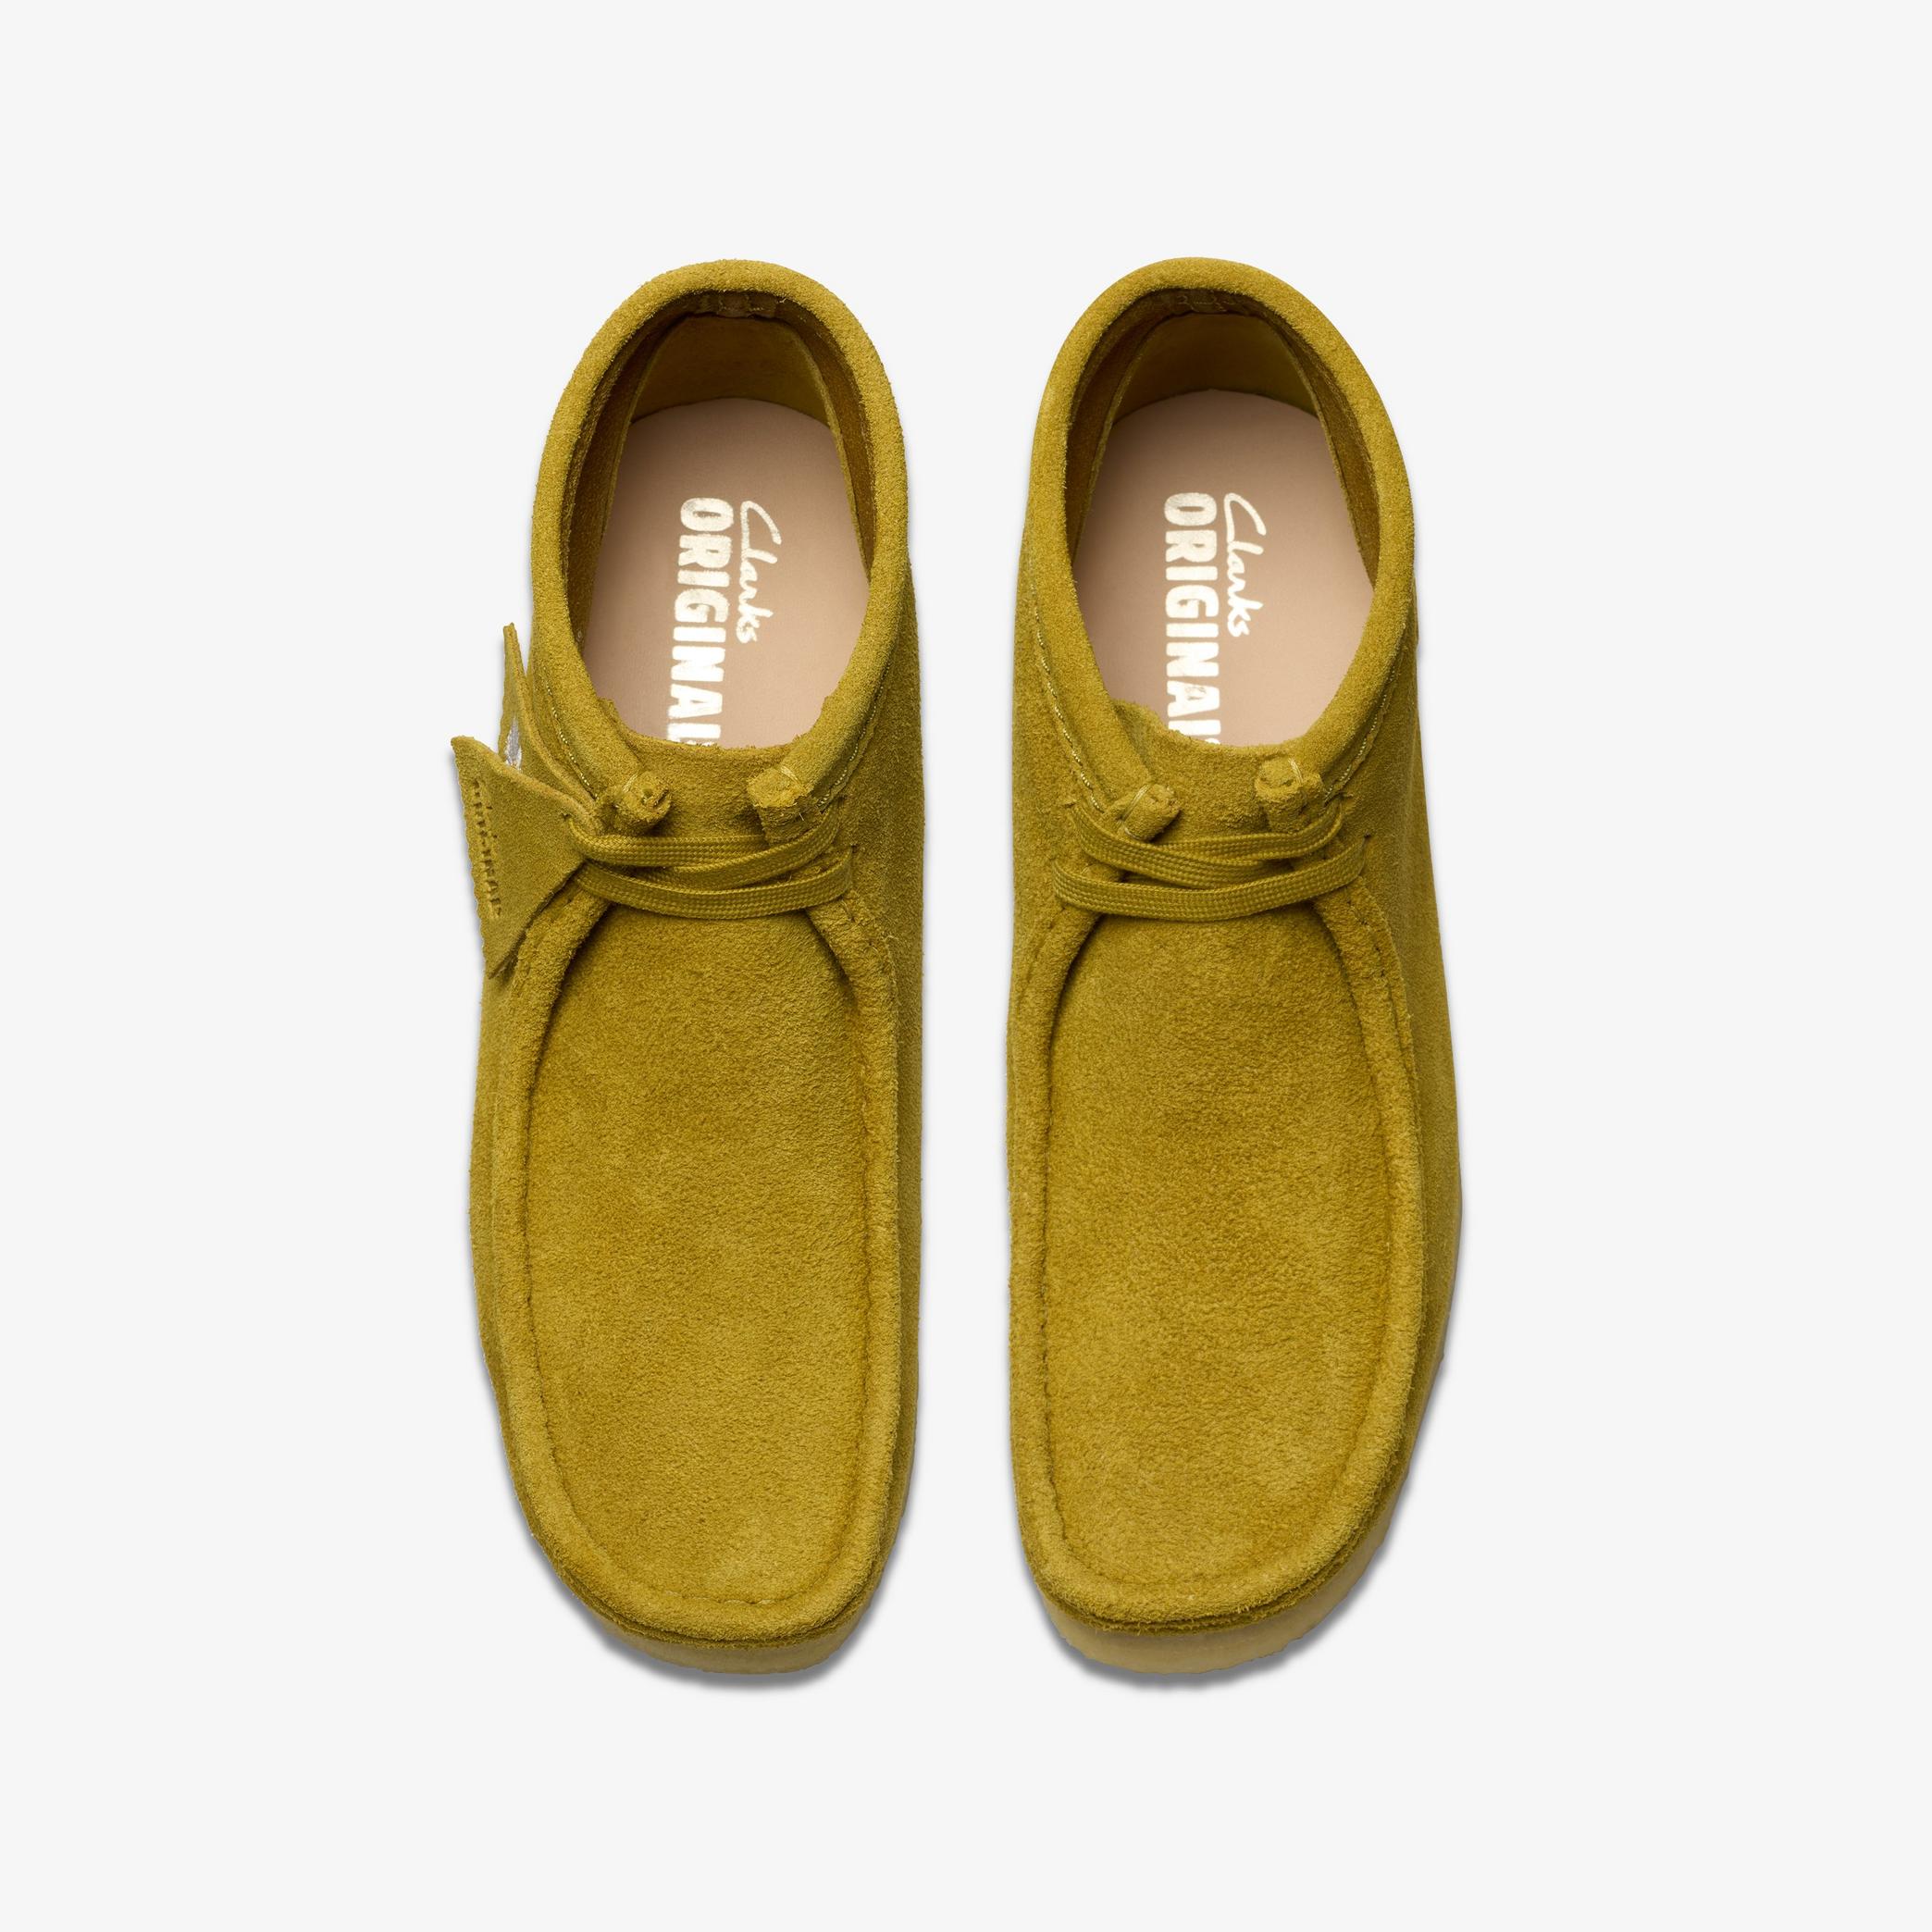 Wallabee Boot Olive Suede Wallabee, view 6 of 7